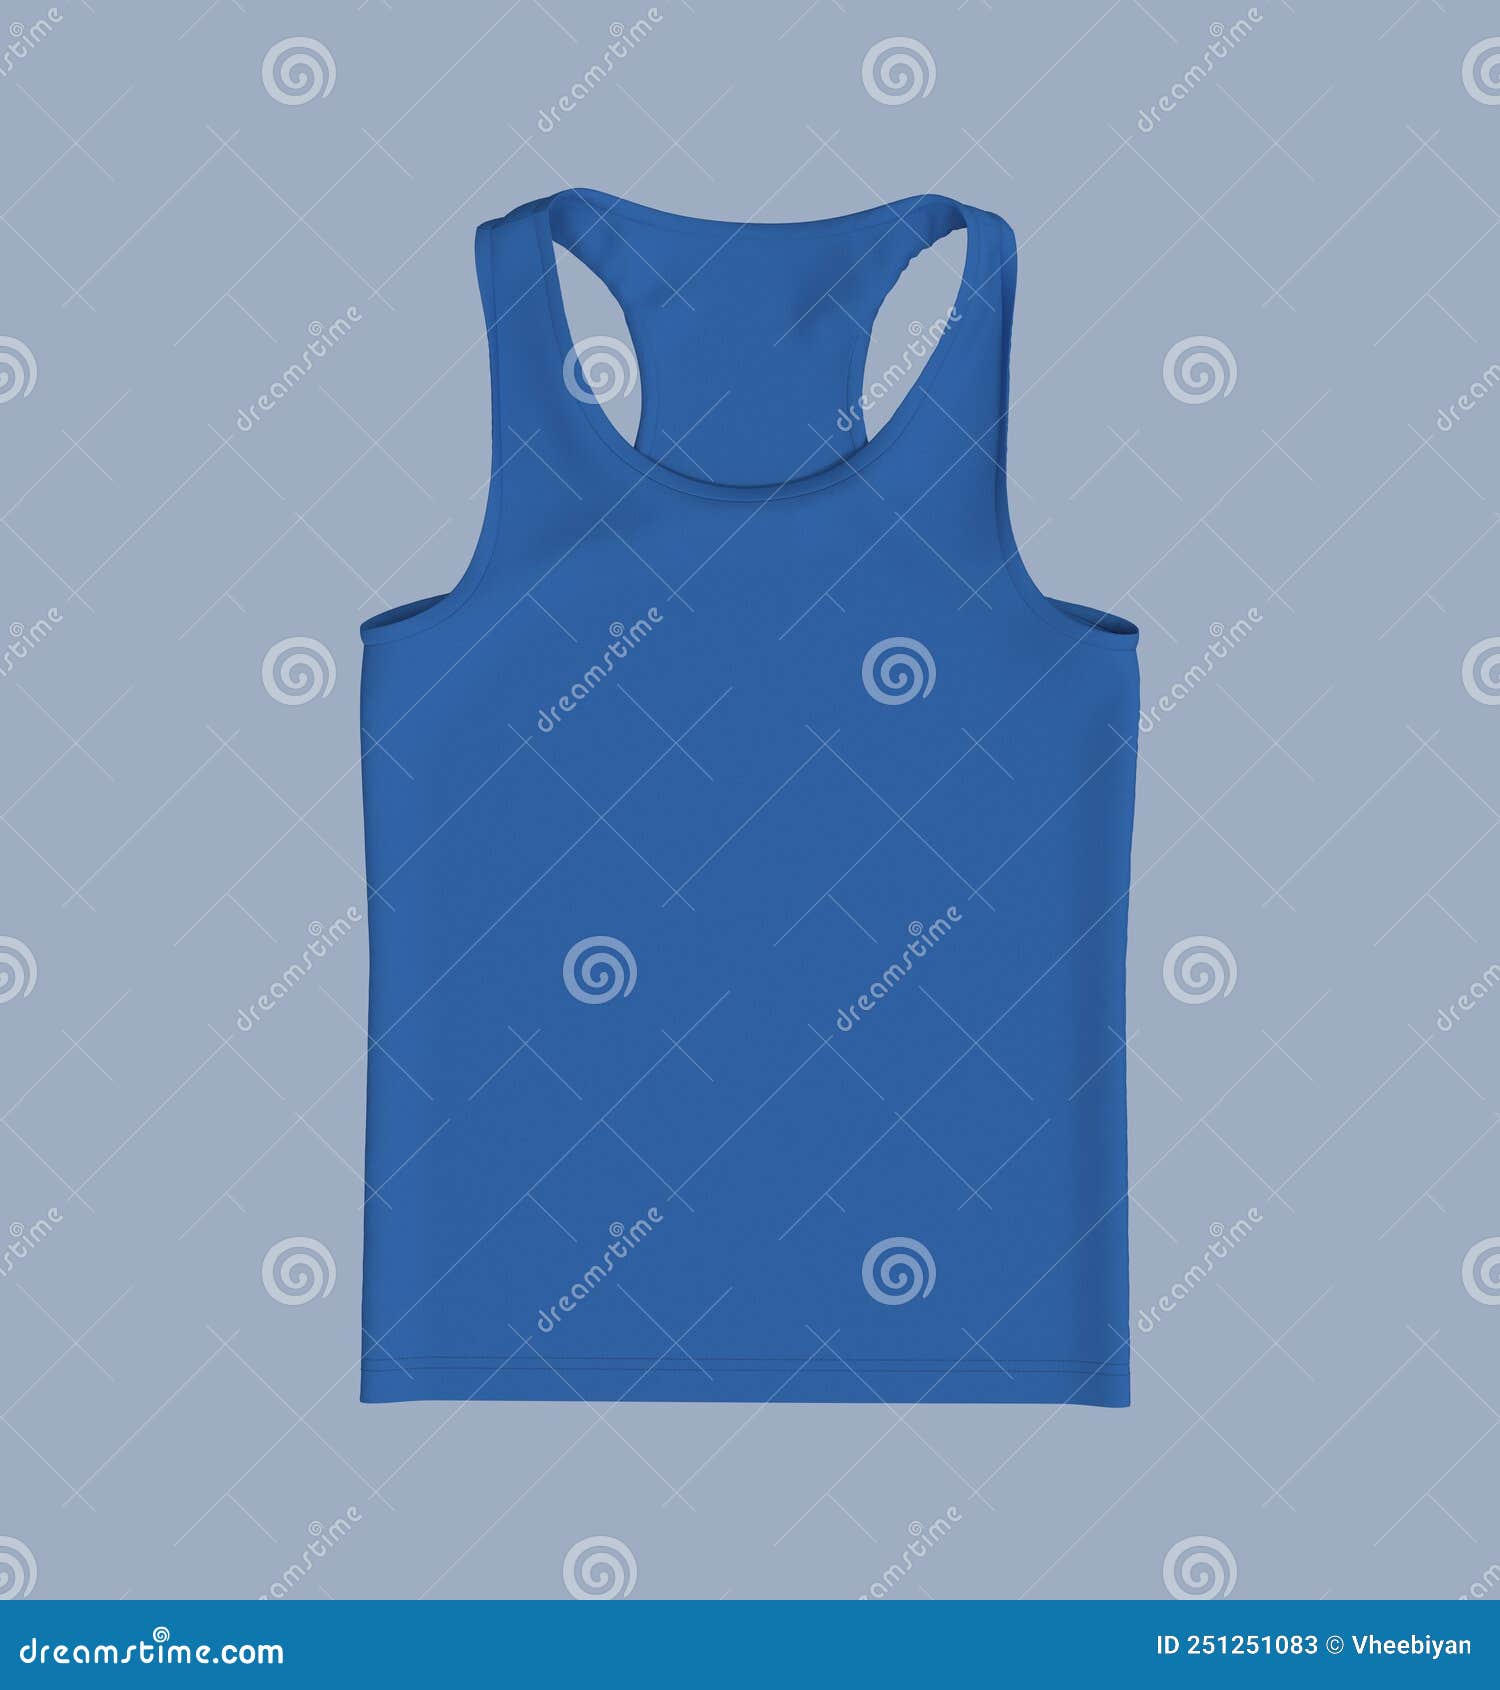 Flatlay Sleeveless T-shirt Mockup in Front and Back Views, Design ...